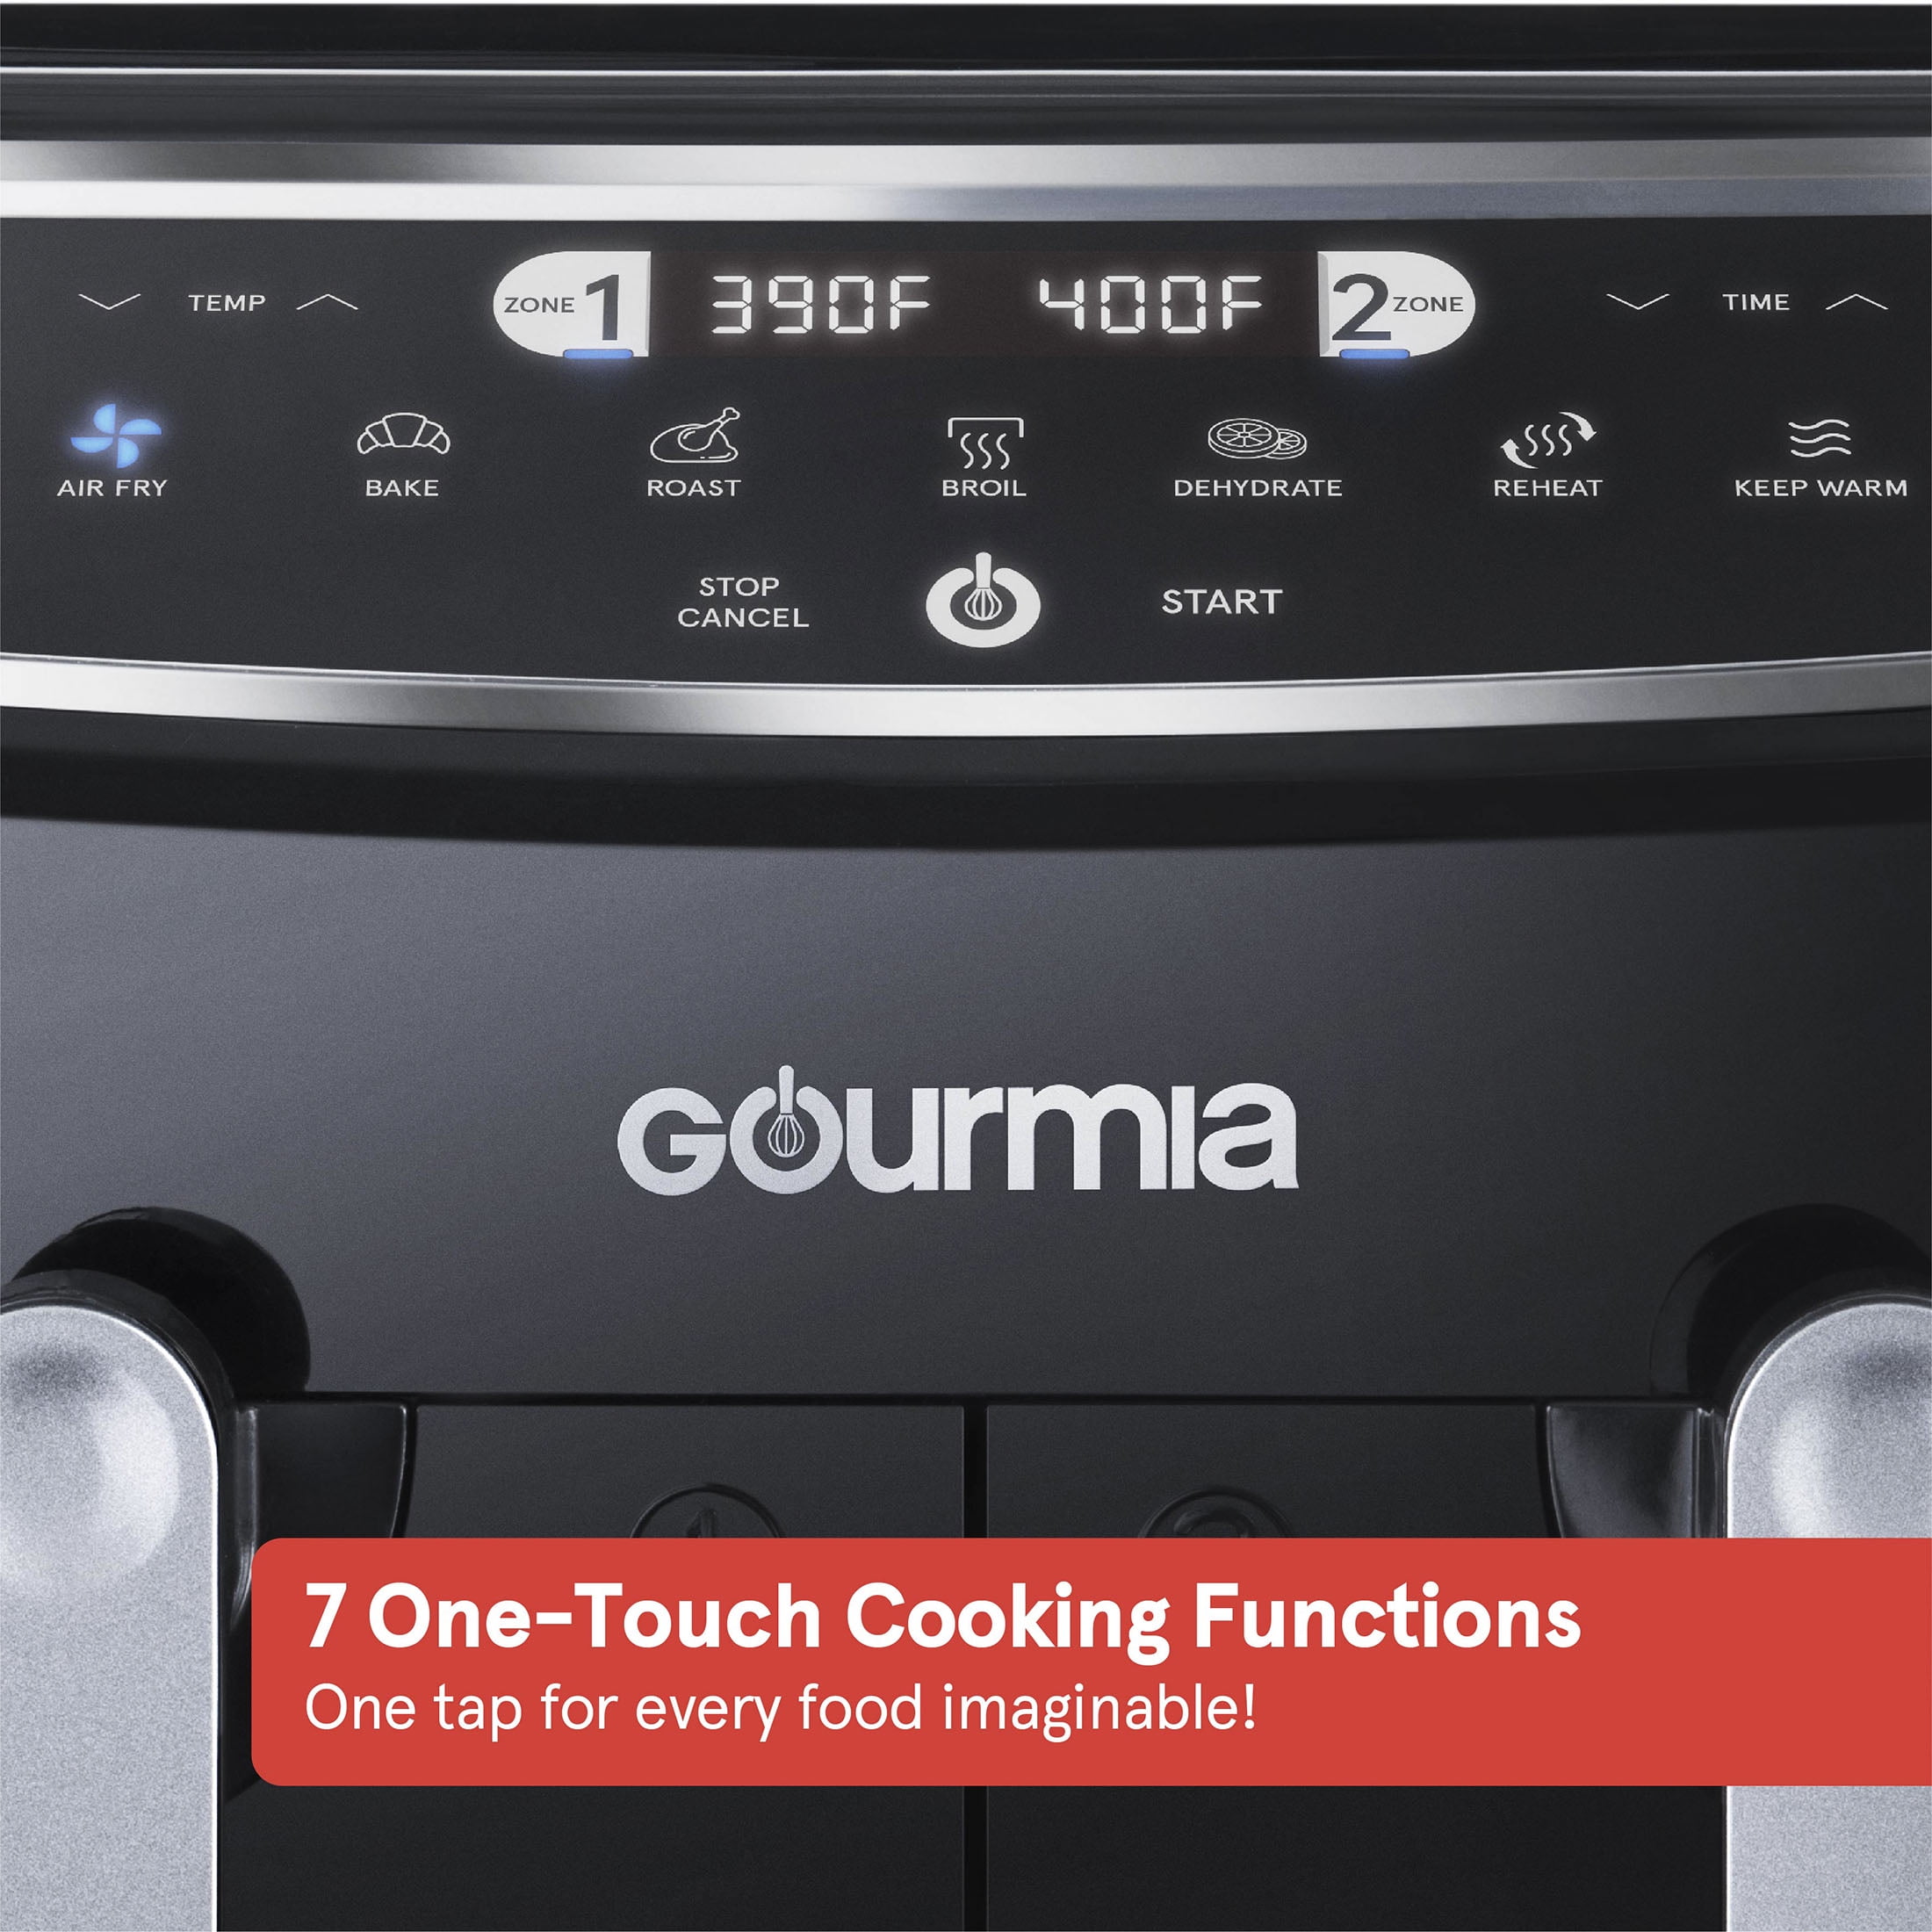 Gourmia Air Fryers (20 products) find prices here »